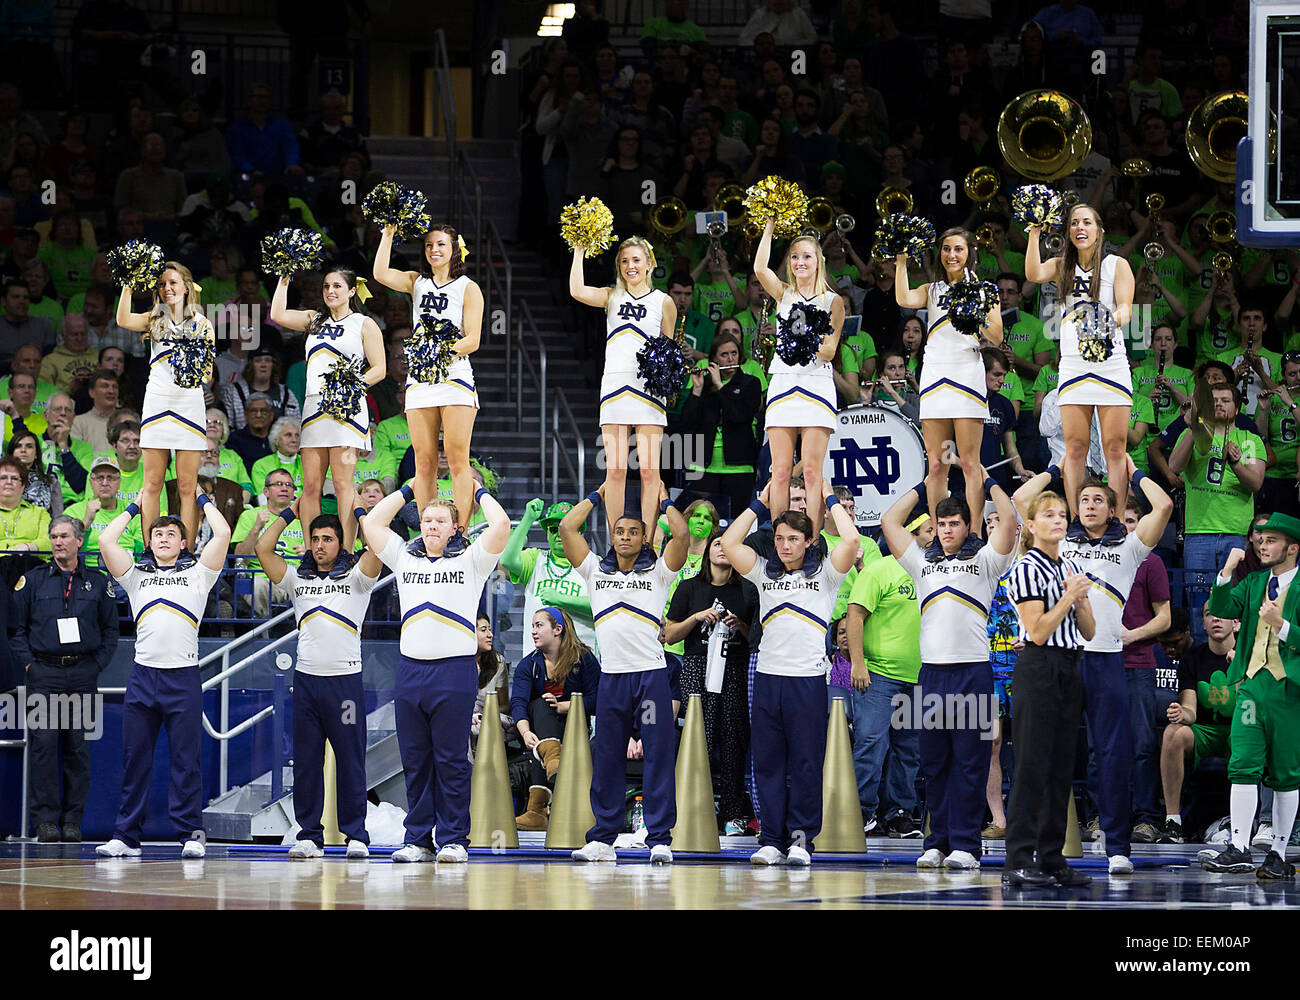 South Bend, Indiana, USA. 19th Jan, 2015. Notre Dame cheerleaders perform during NCAA Basketball game action between the Notre Dame Fighting Irish and the Tennessee Volunteers at Purcell Pavilion at the Joyce Center in South Bend, Indiana. Notre Dame defeated Tennessee 88-77. © csm/Alamy Live News Stock Photo